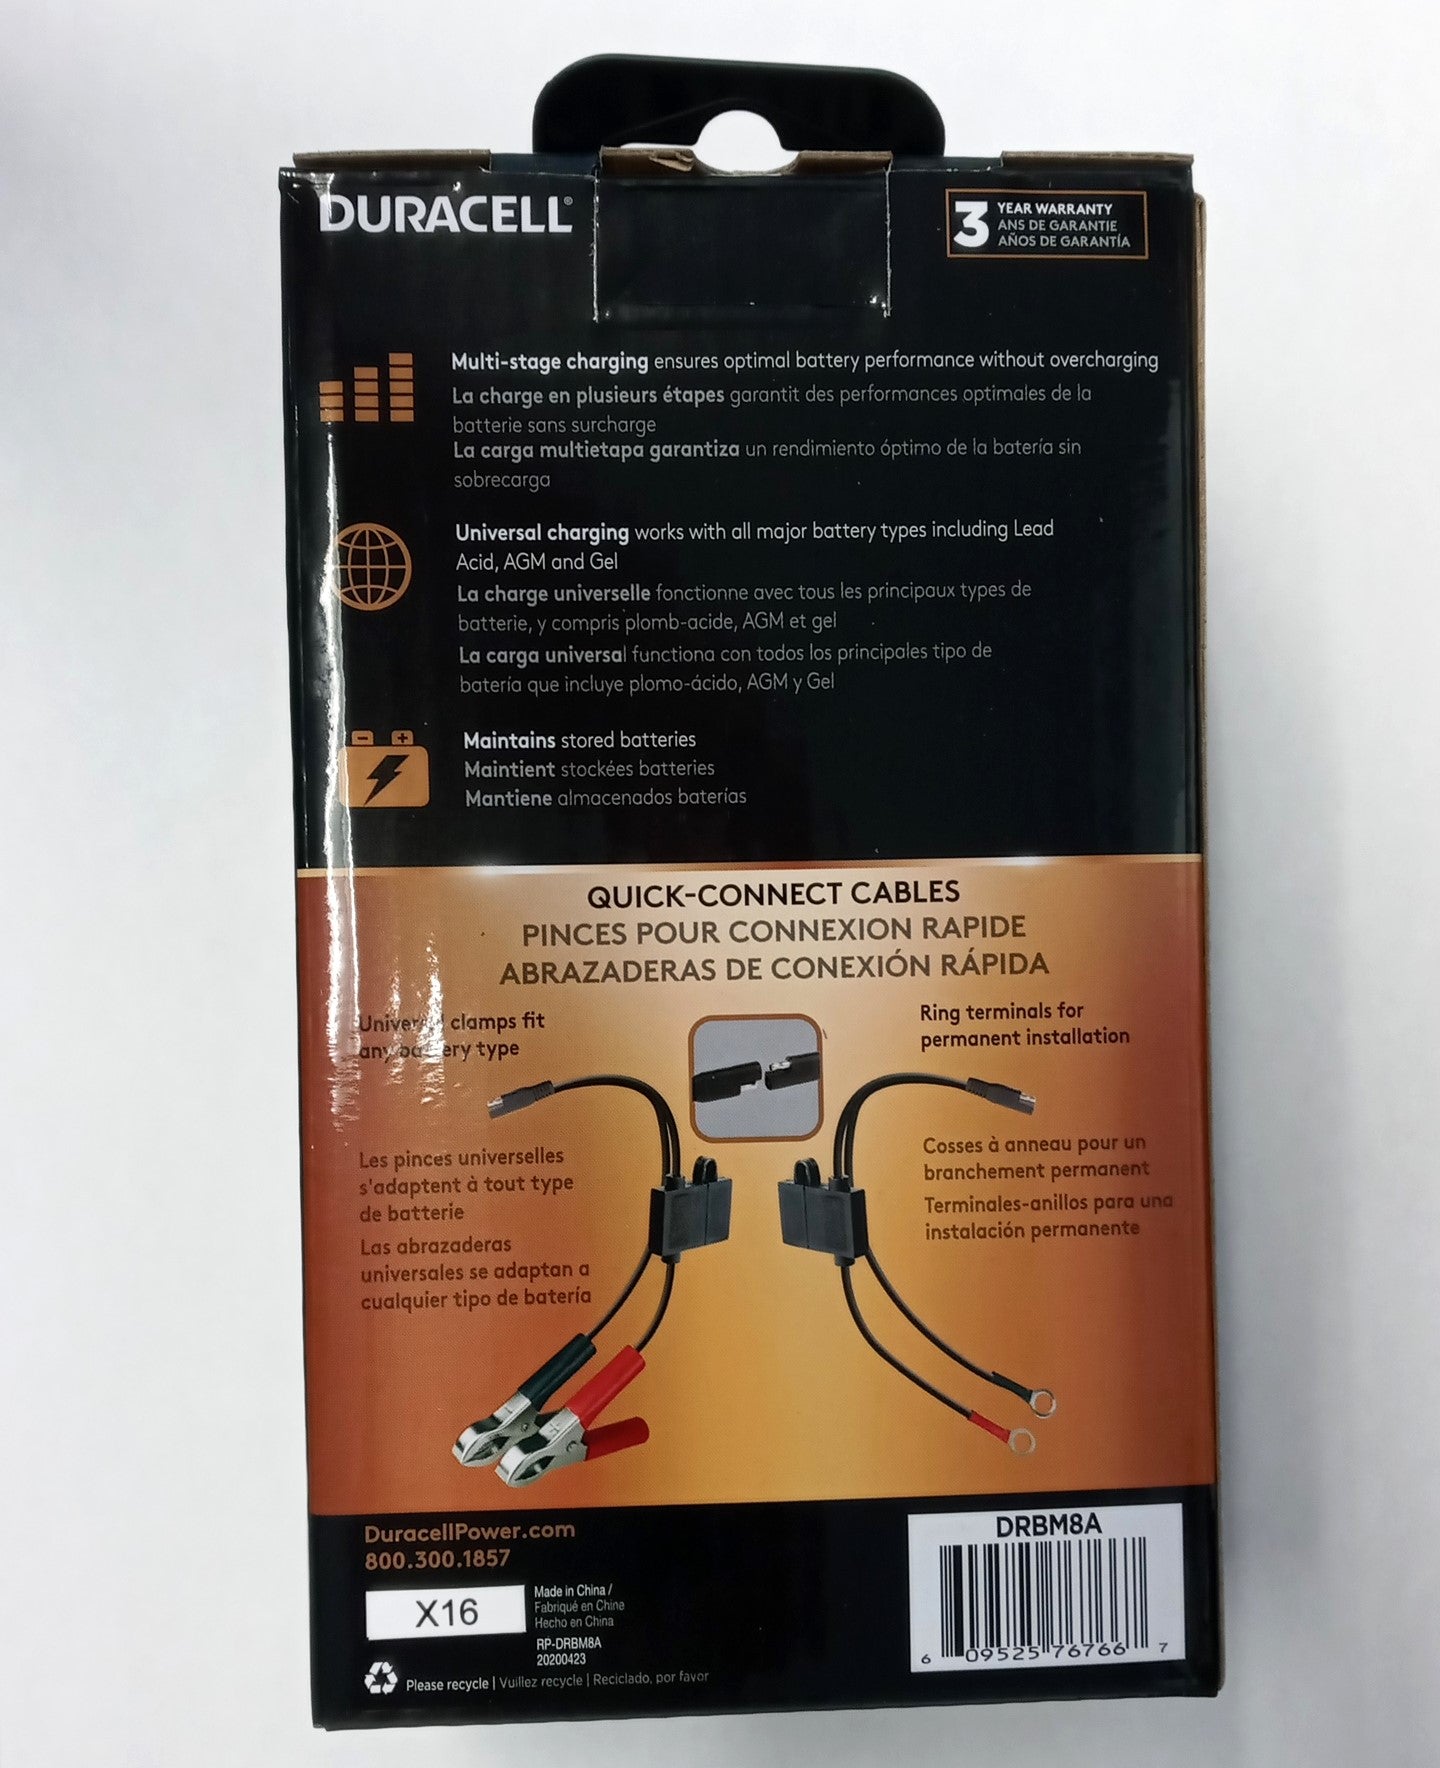 Duracell DRBM8A 800mA Battery Charger + Maintainer 12 Volt